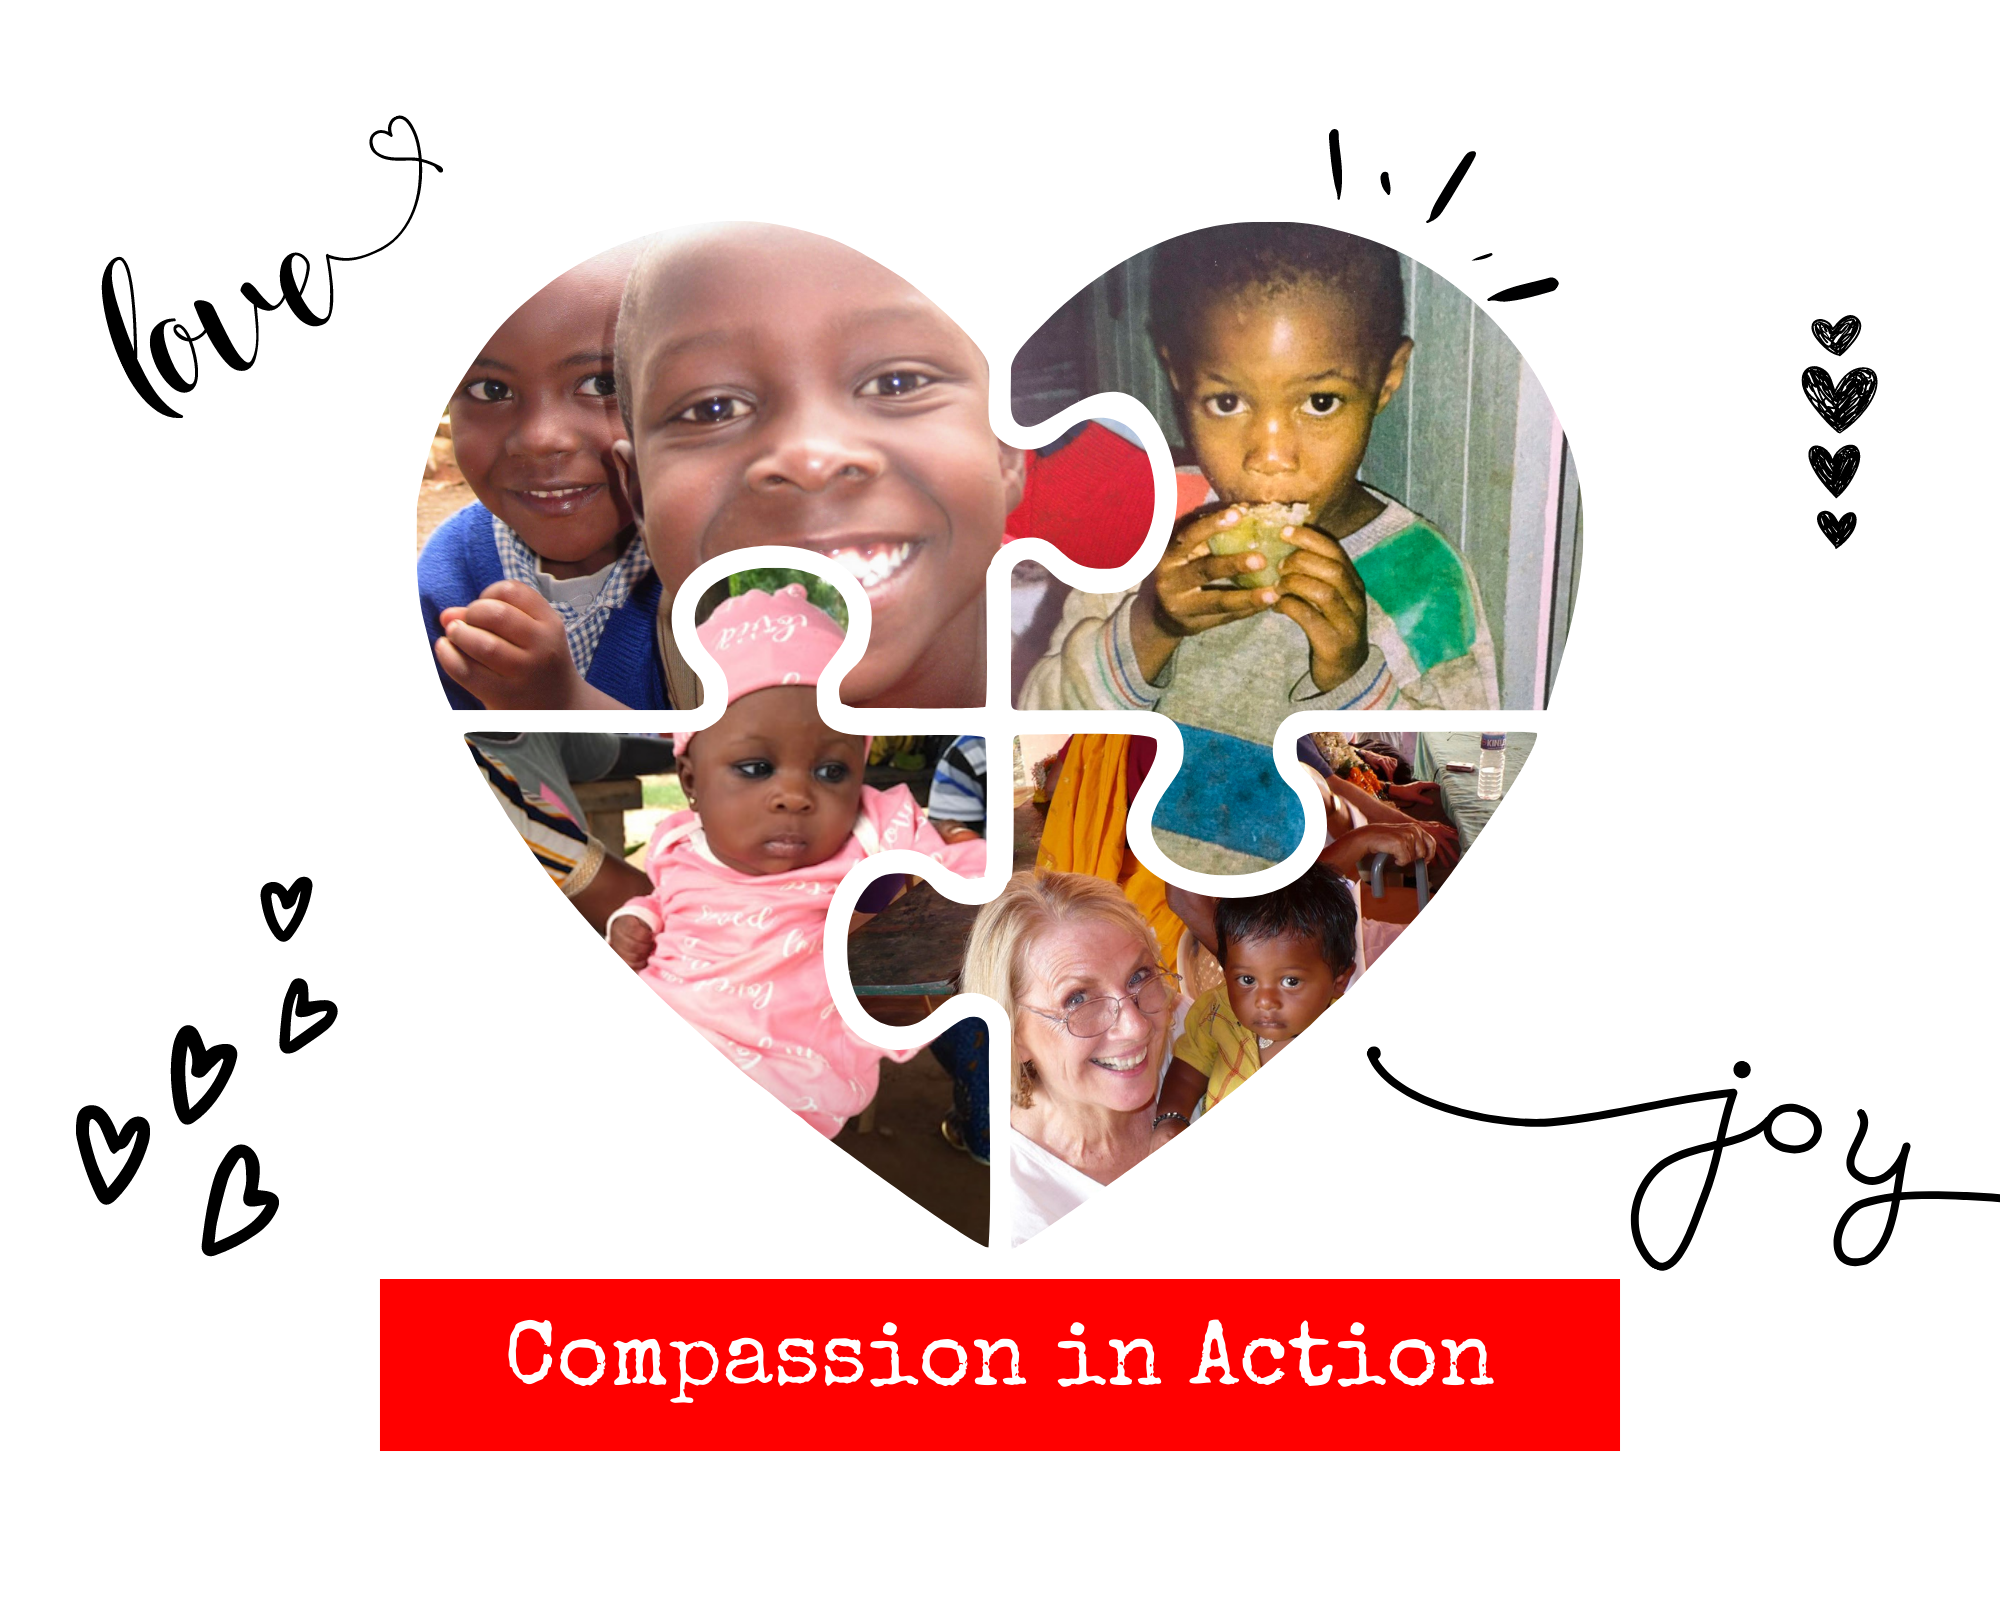 Global Action - Compassion in Action